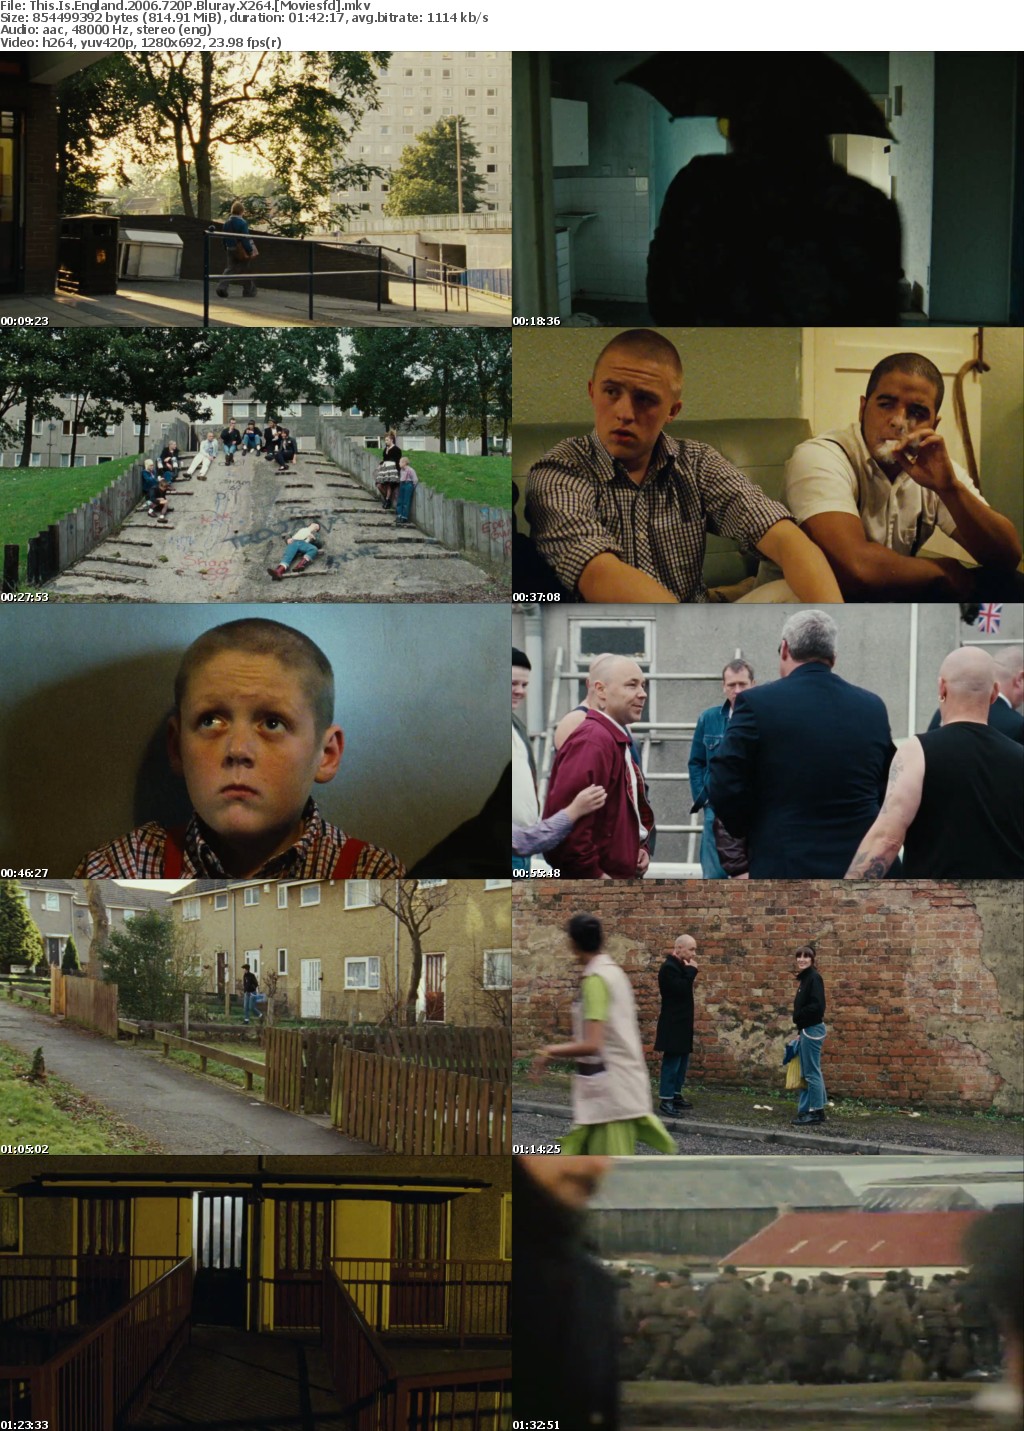 This Is England (2006) 720p BluRay X264 MoviesFD